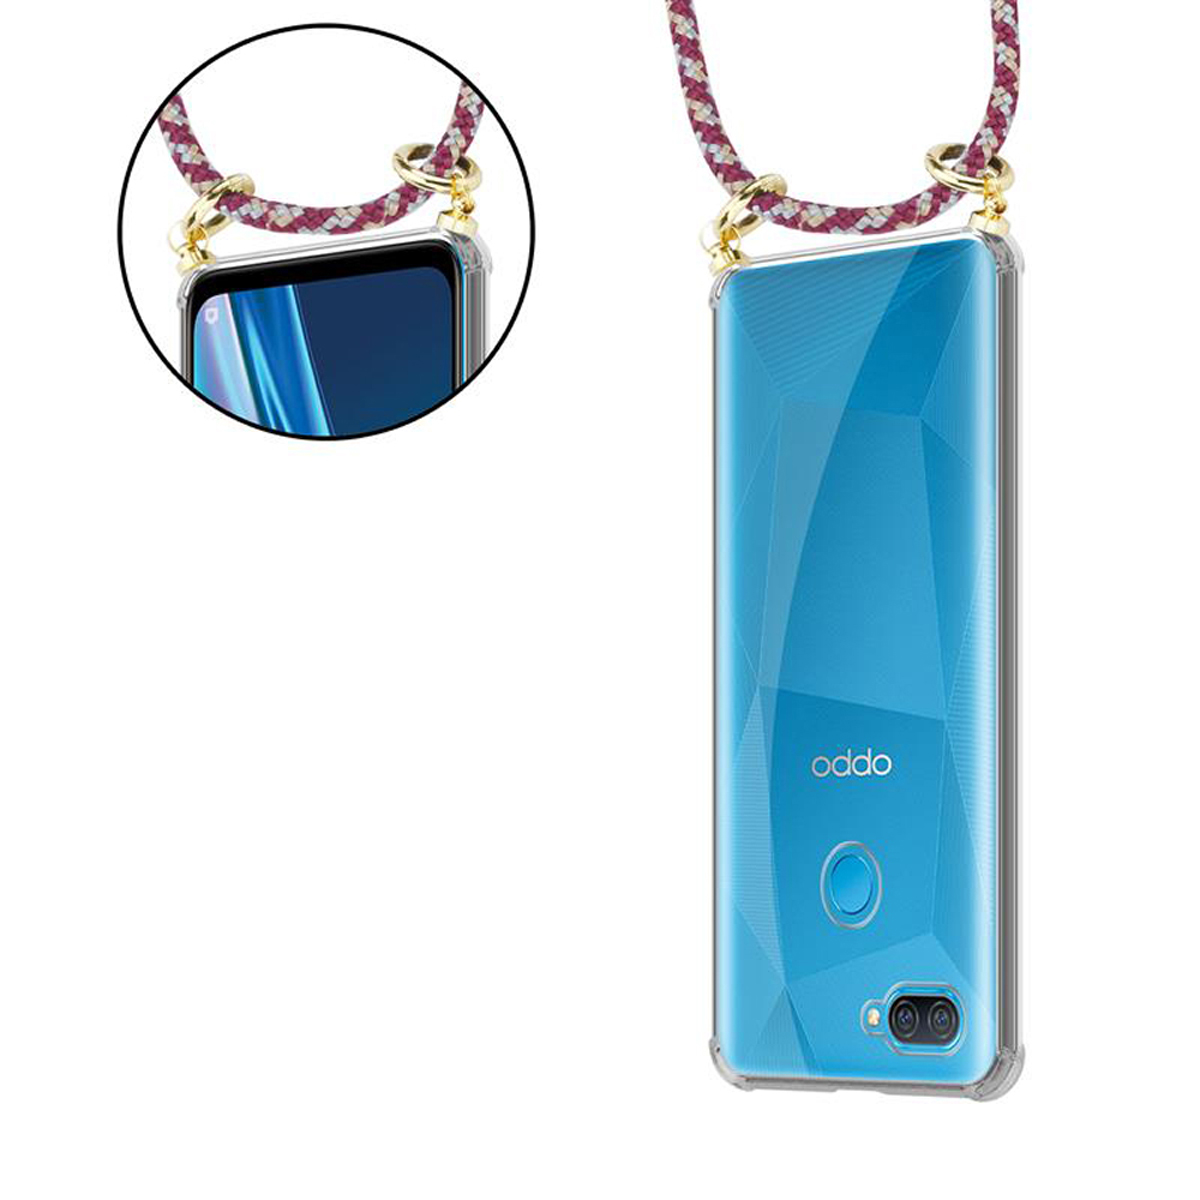 und GELB ROT WEIß Handy Band Backcover, CADORABO A12, mit Ringen, Gold Kordel Kette Oppo, abnehmbarer Hülle,